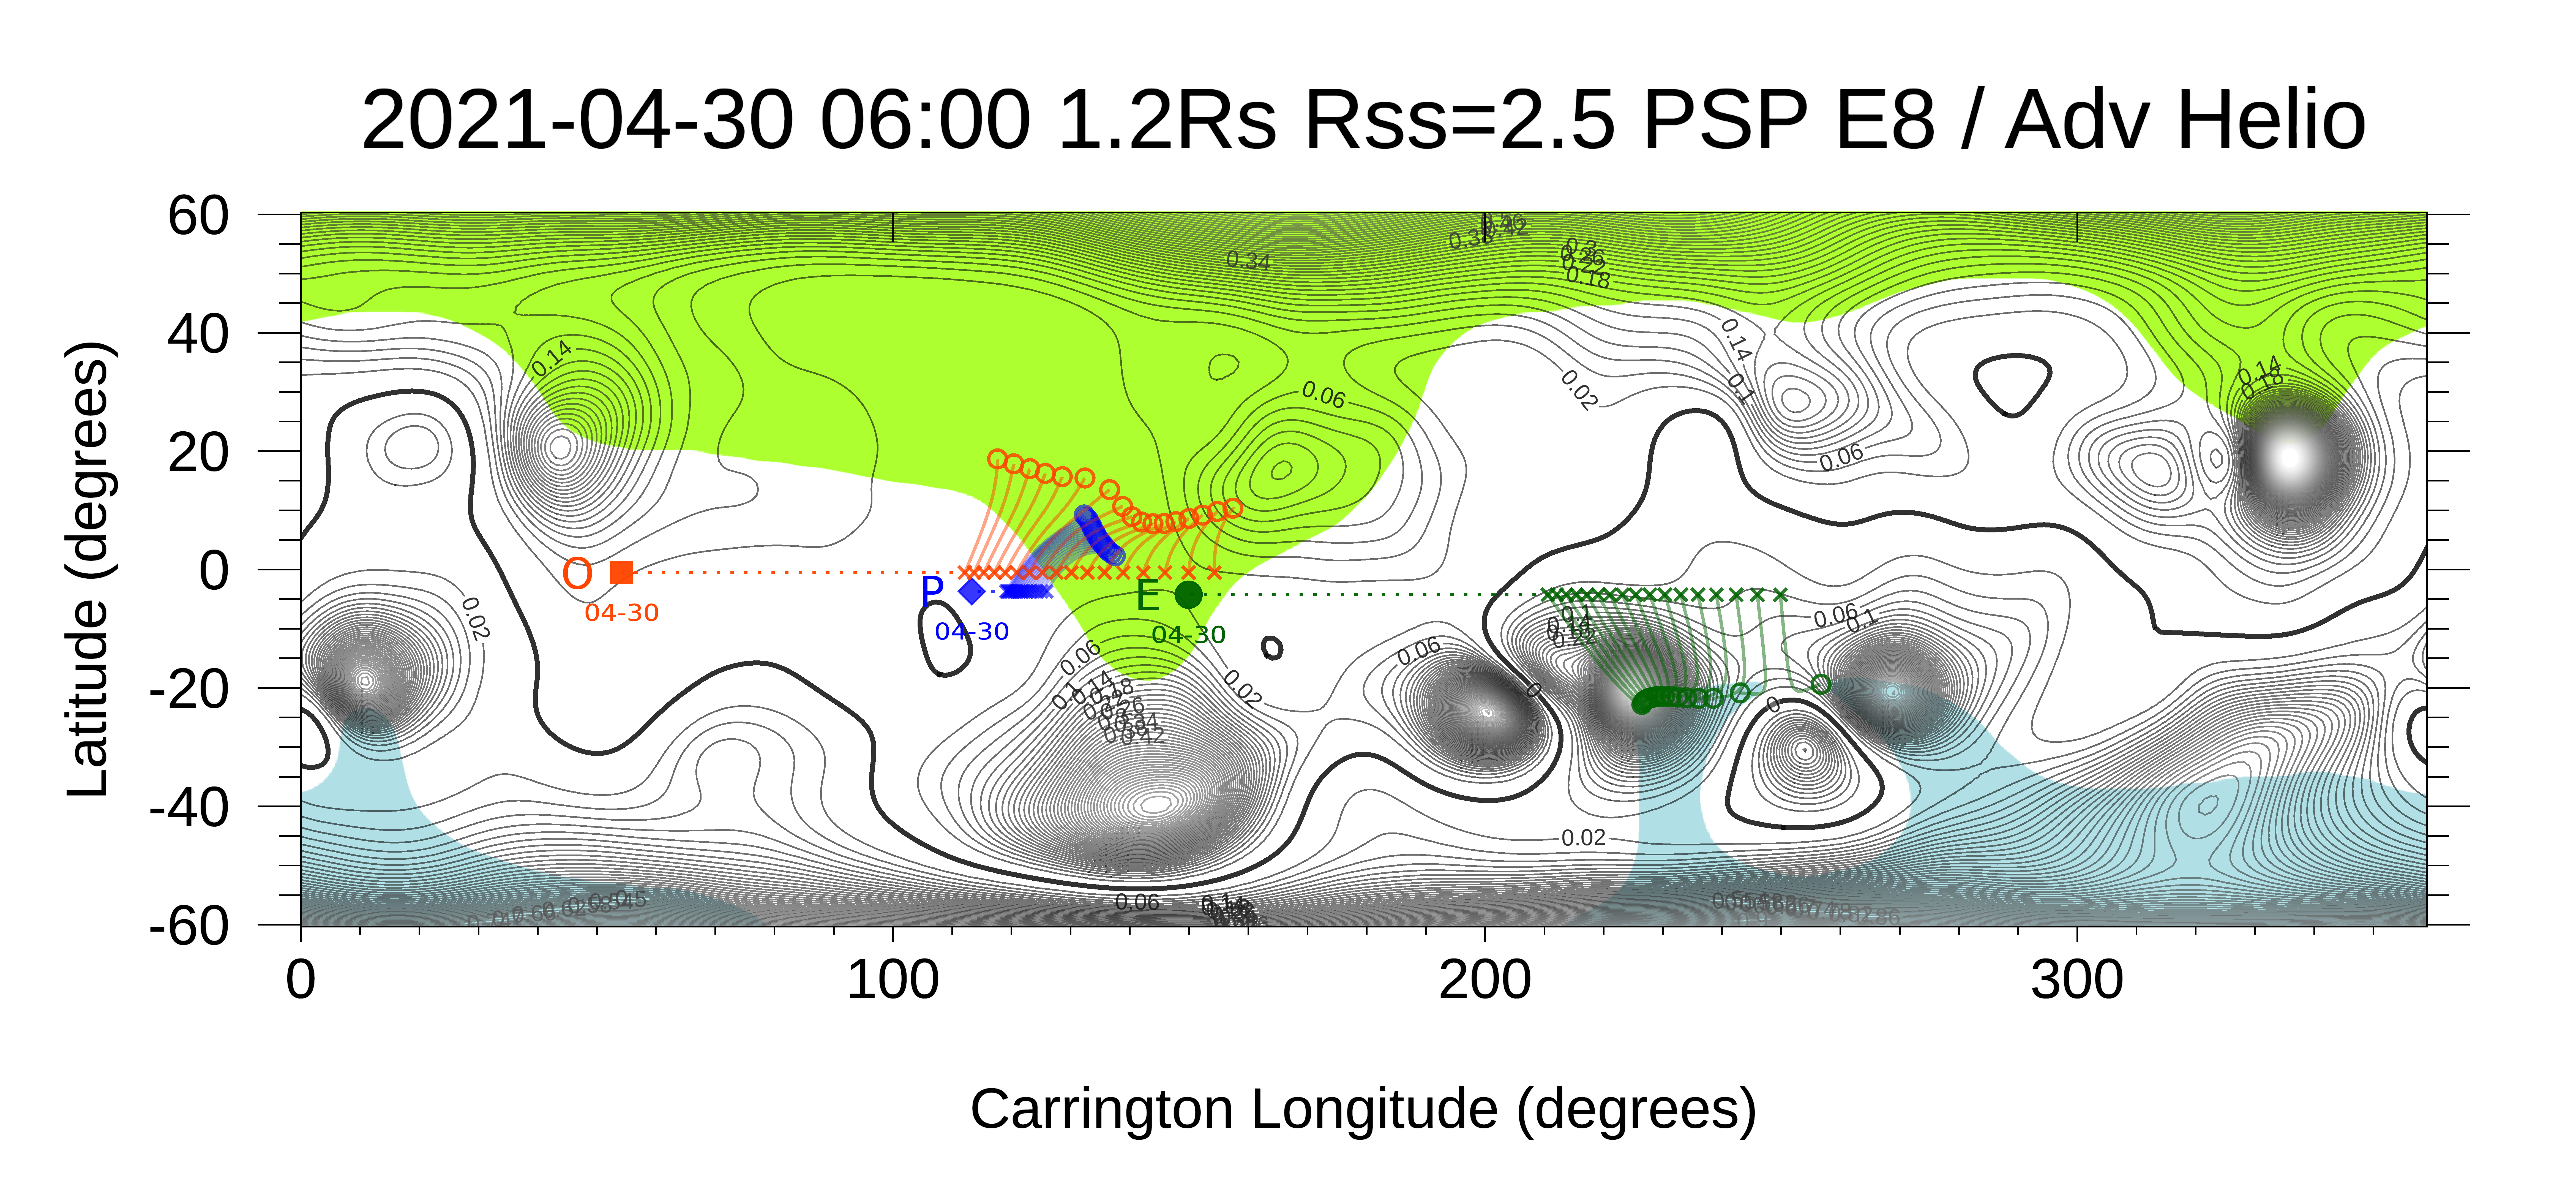 Earth, PSP and Solar Orbiter current positions (Apr 30, 2021). PSP and Solar Orbiter are magnetically connected to the same open magnetic flux region and measuring properties of the same solar wind stream.